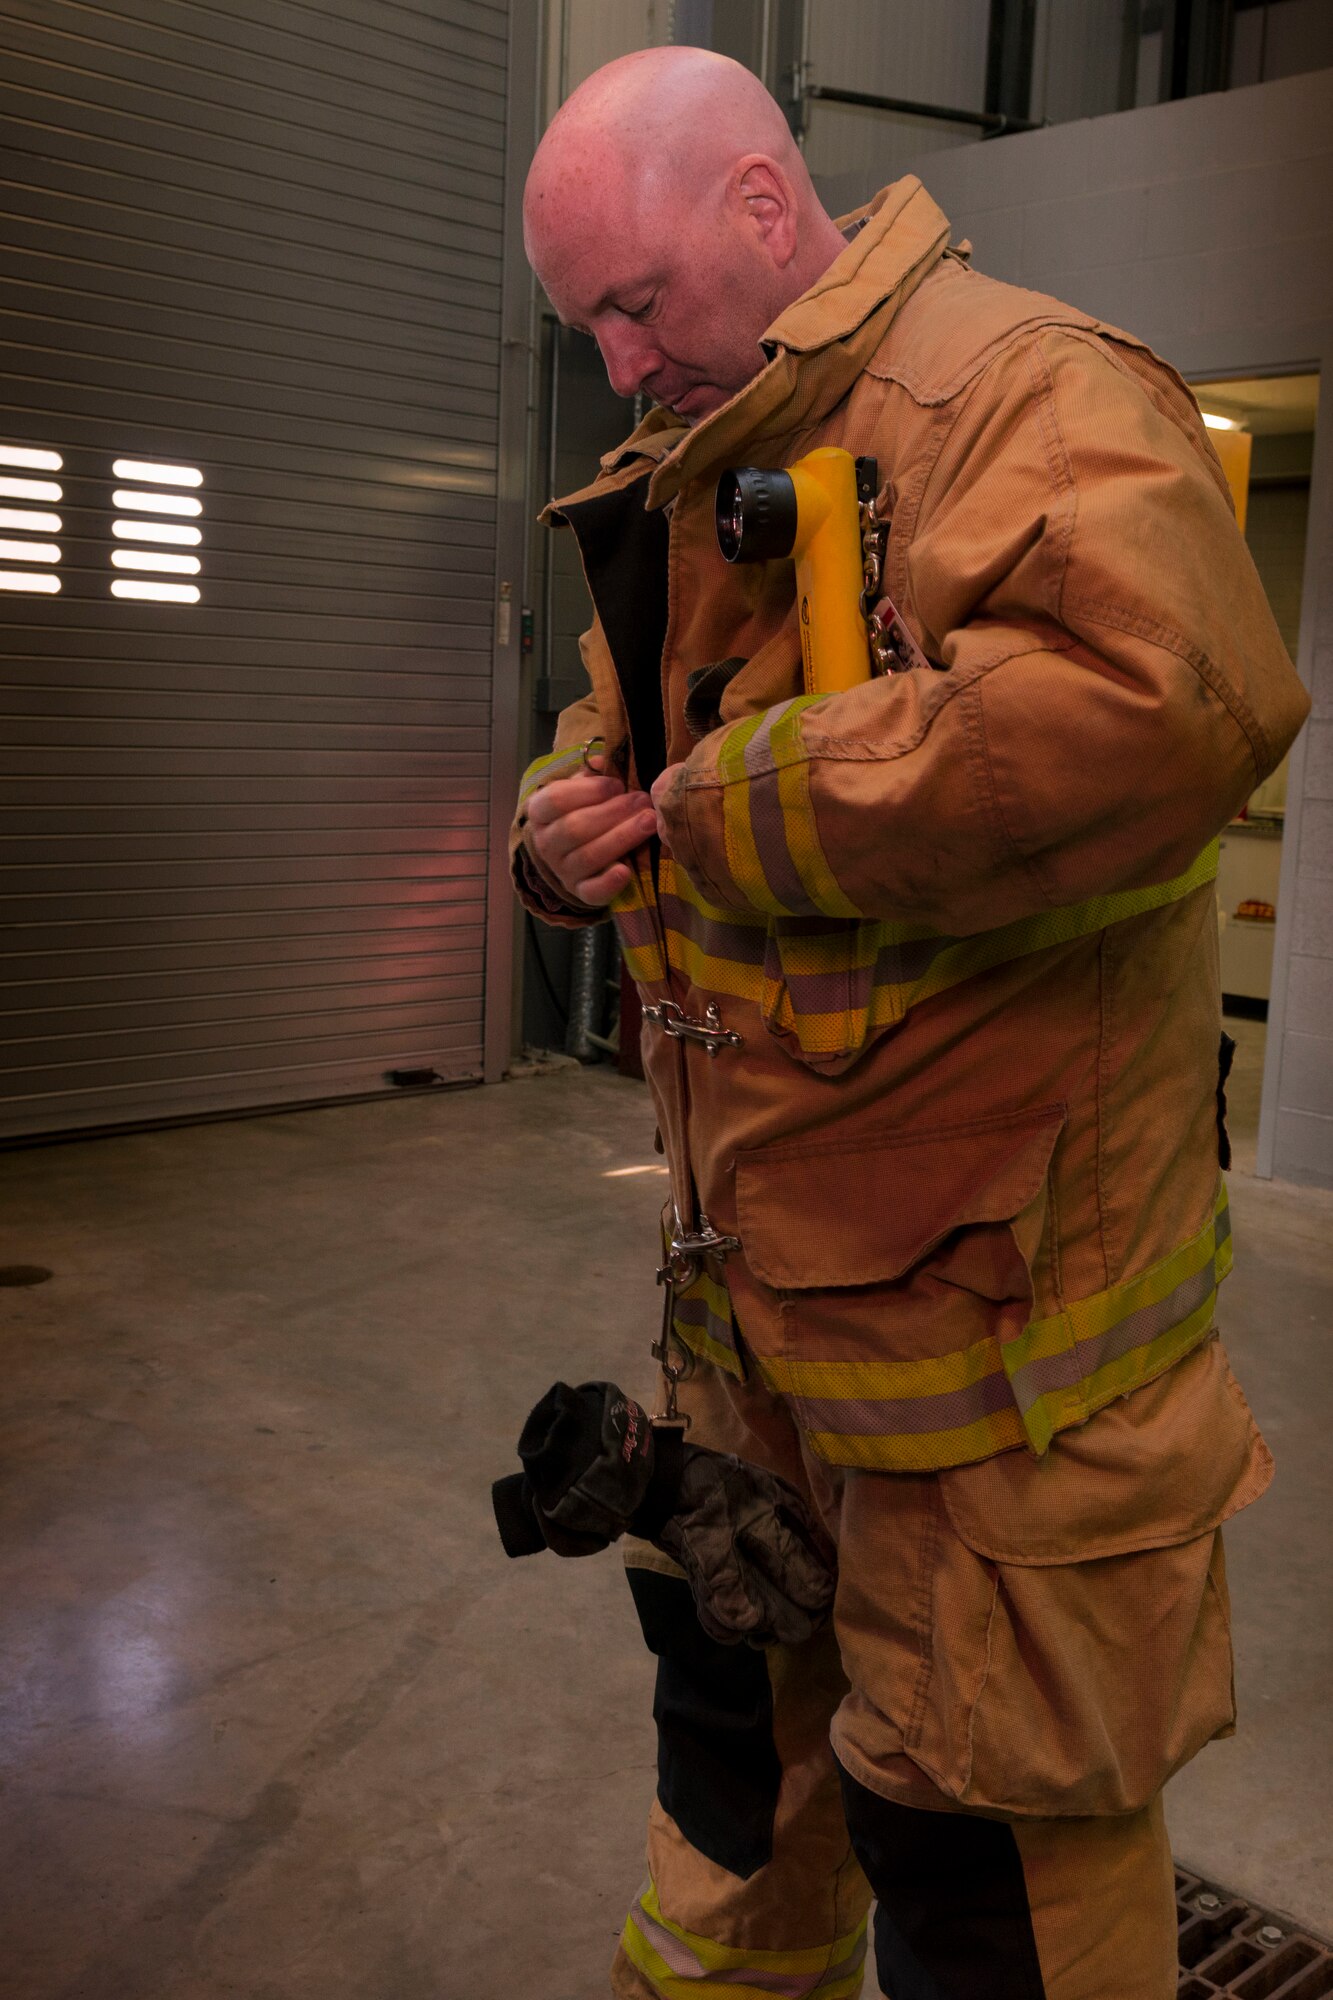 Tech. Sgt. Ronald Avery, firefighter with Bradley Air National Guard Base, adjusts his Personal Protection Equipment (PPE) Nov. 3, 2019 at the Bradley Air National Guard Fire Department, East Granby, Conn. Avery was one of the firefighters from Bradley who responded to the B-17 Flying Fortress crash Oct. 2, 2019. (U.S. Air National Guard photo by Airman 1st Class Chanhda Ly)